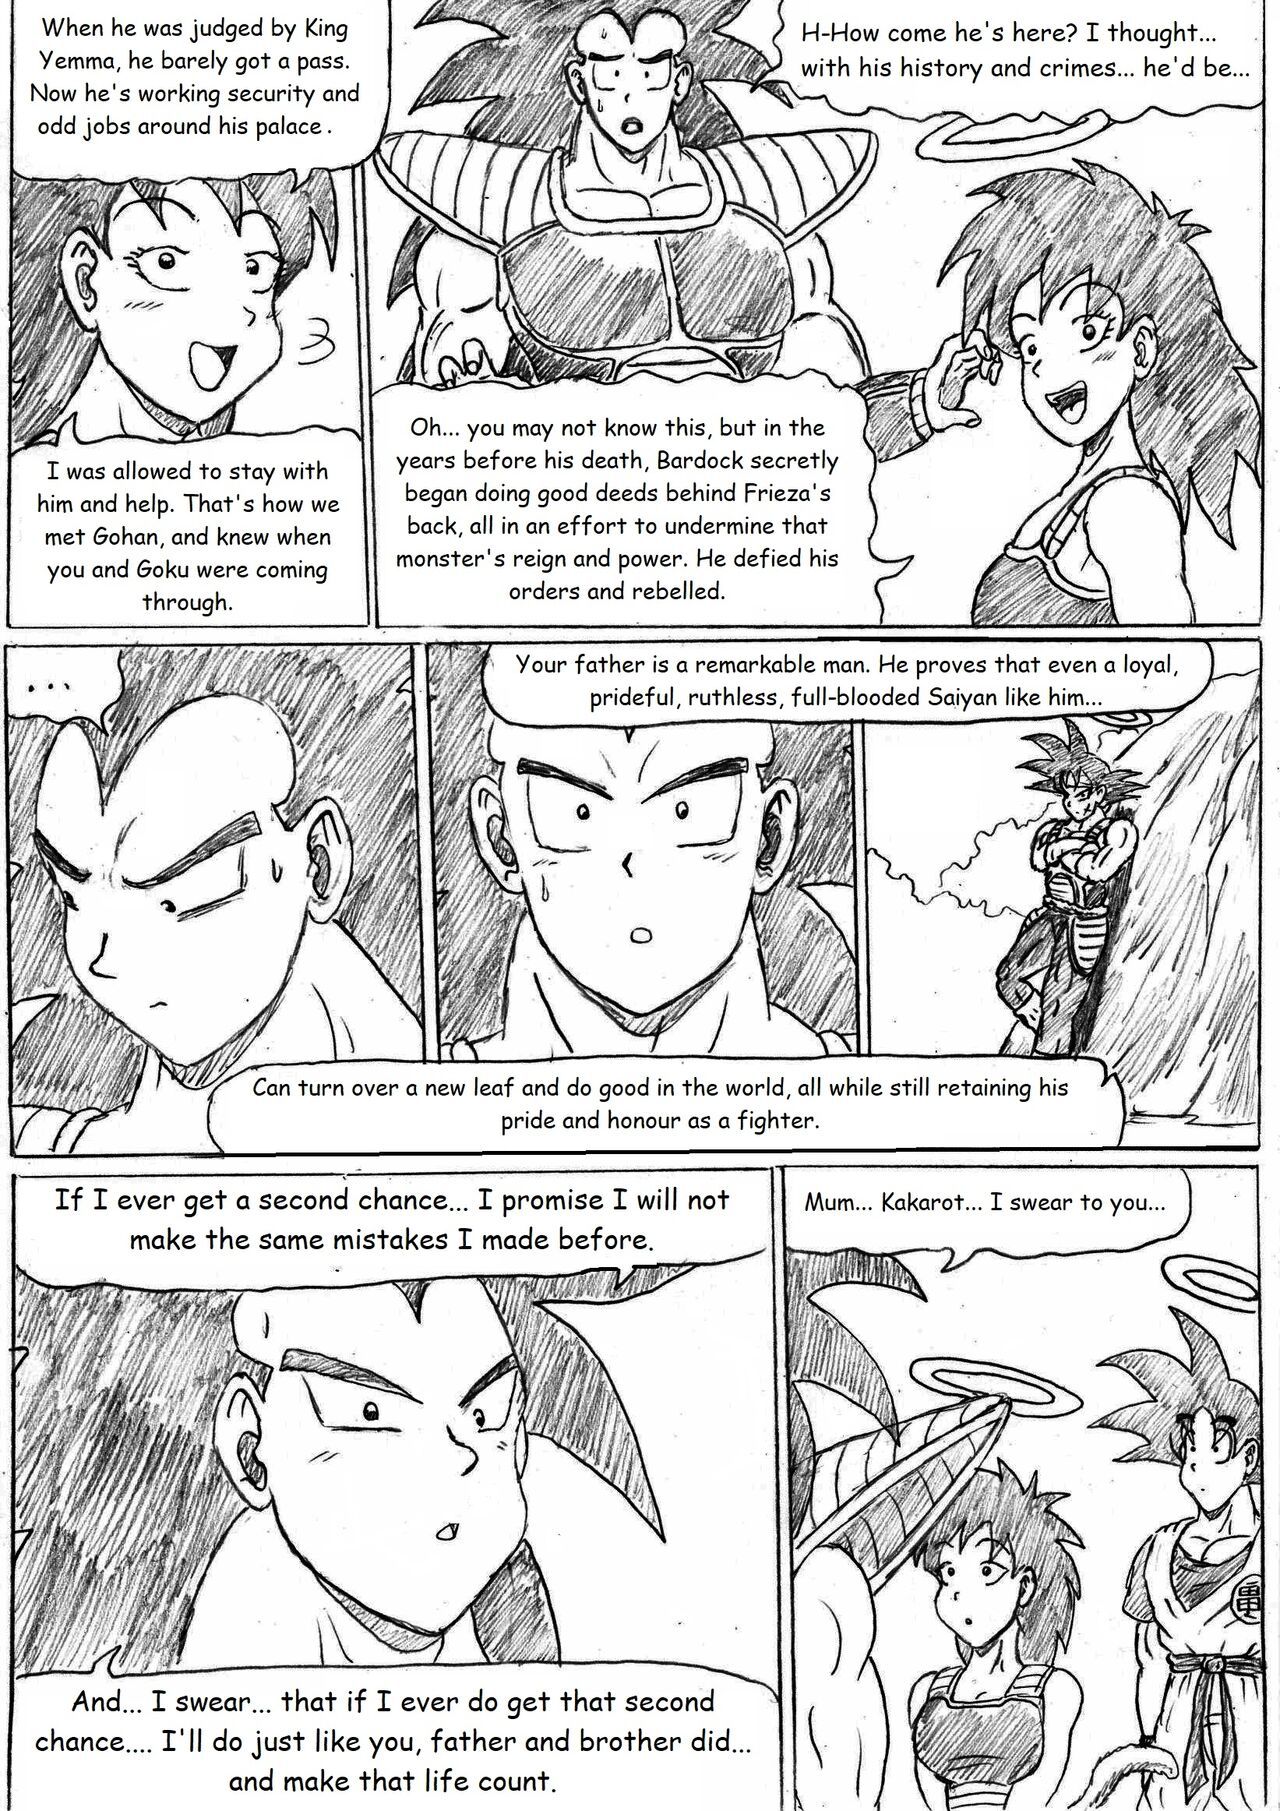 [TheWriteFiction] Dragonball Z Golden Age - Chapter 5 - Teamwork (Ongoing) 10